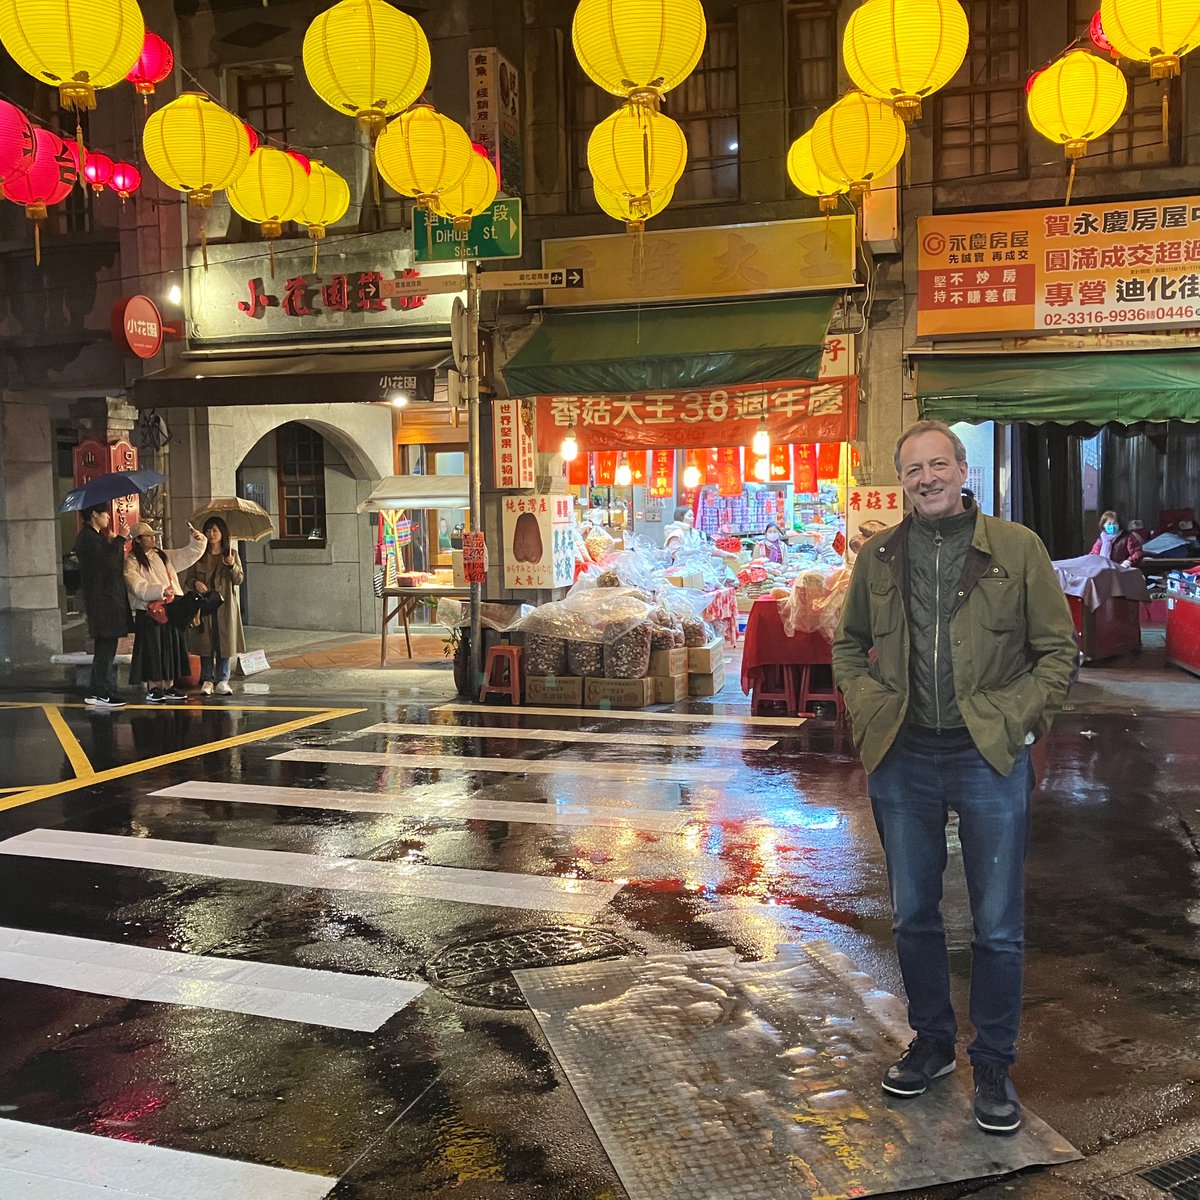 For @bbcradio4 The Invention of China we made a journey round the edges to places under threat - this is Taiwan which we loved @MishaGlenny